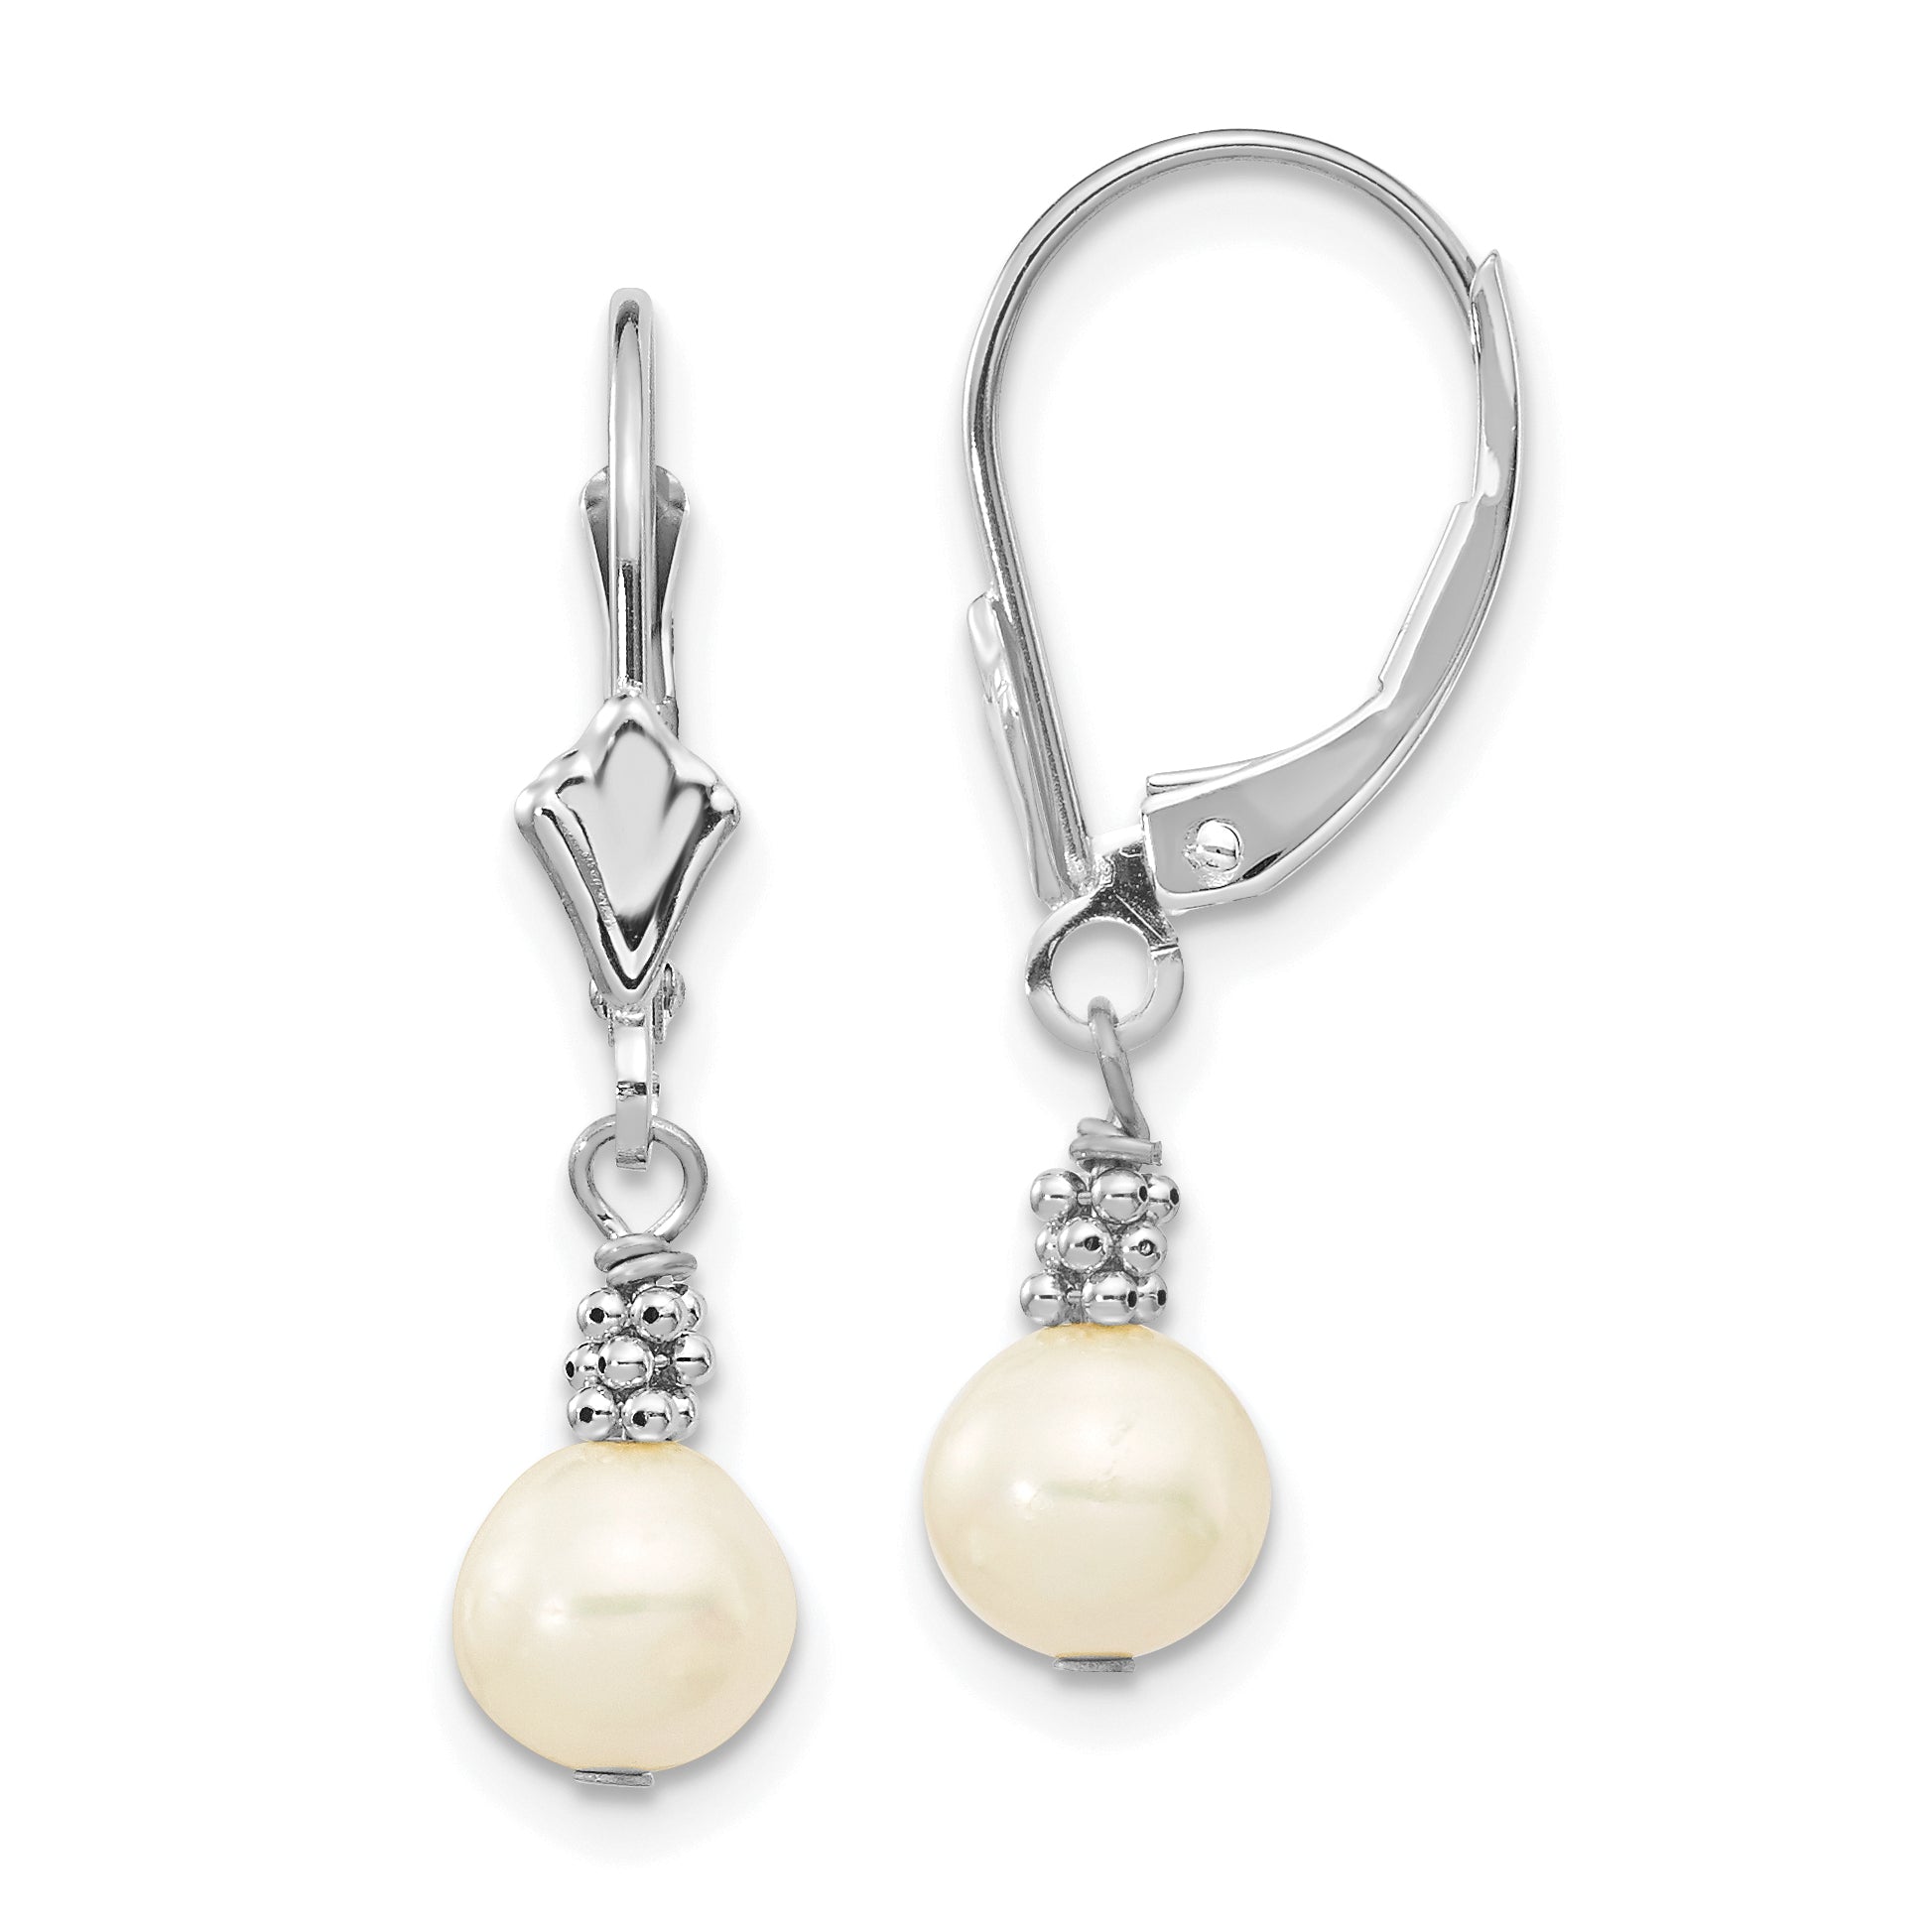 14K White Gold 5-6mm White Semi-round FWC Pearl Leverback Earrings